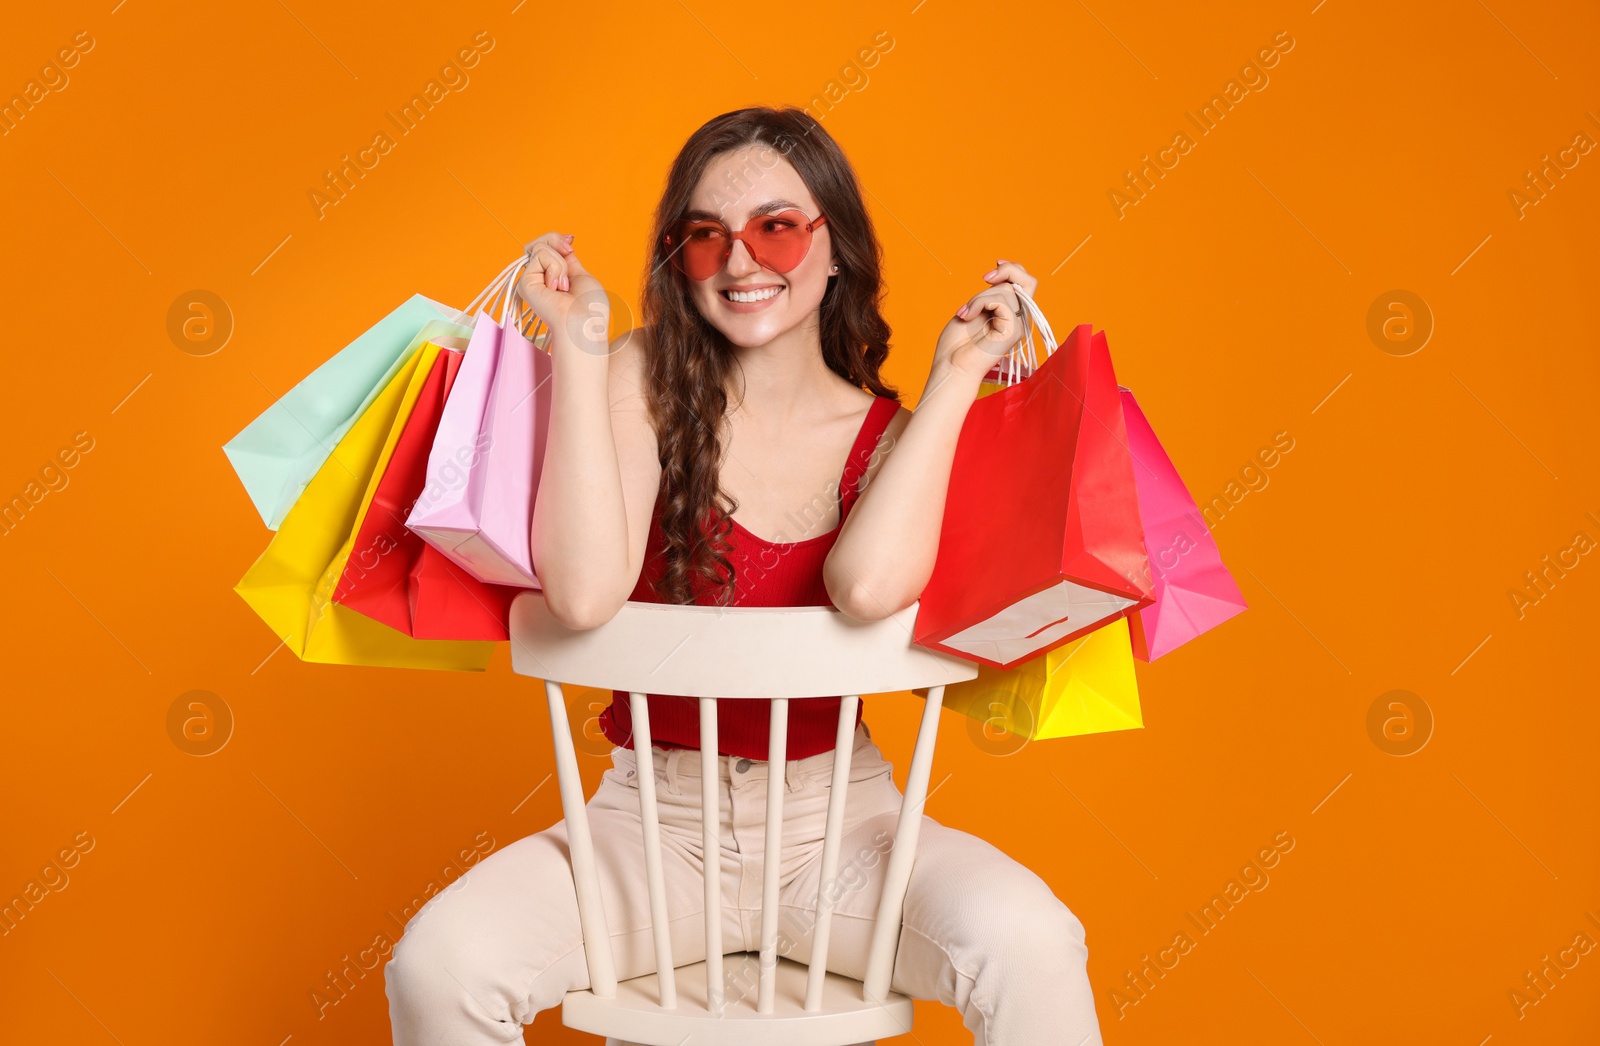 Photo of Happy woman in stylish sunglasses with many colorful shopping bags on chair against orange background